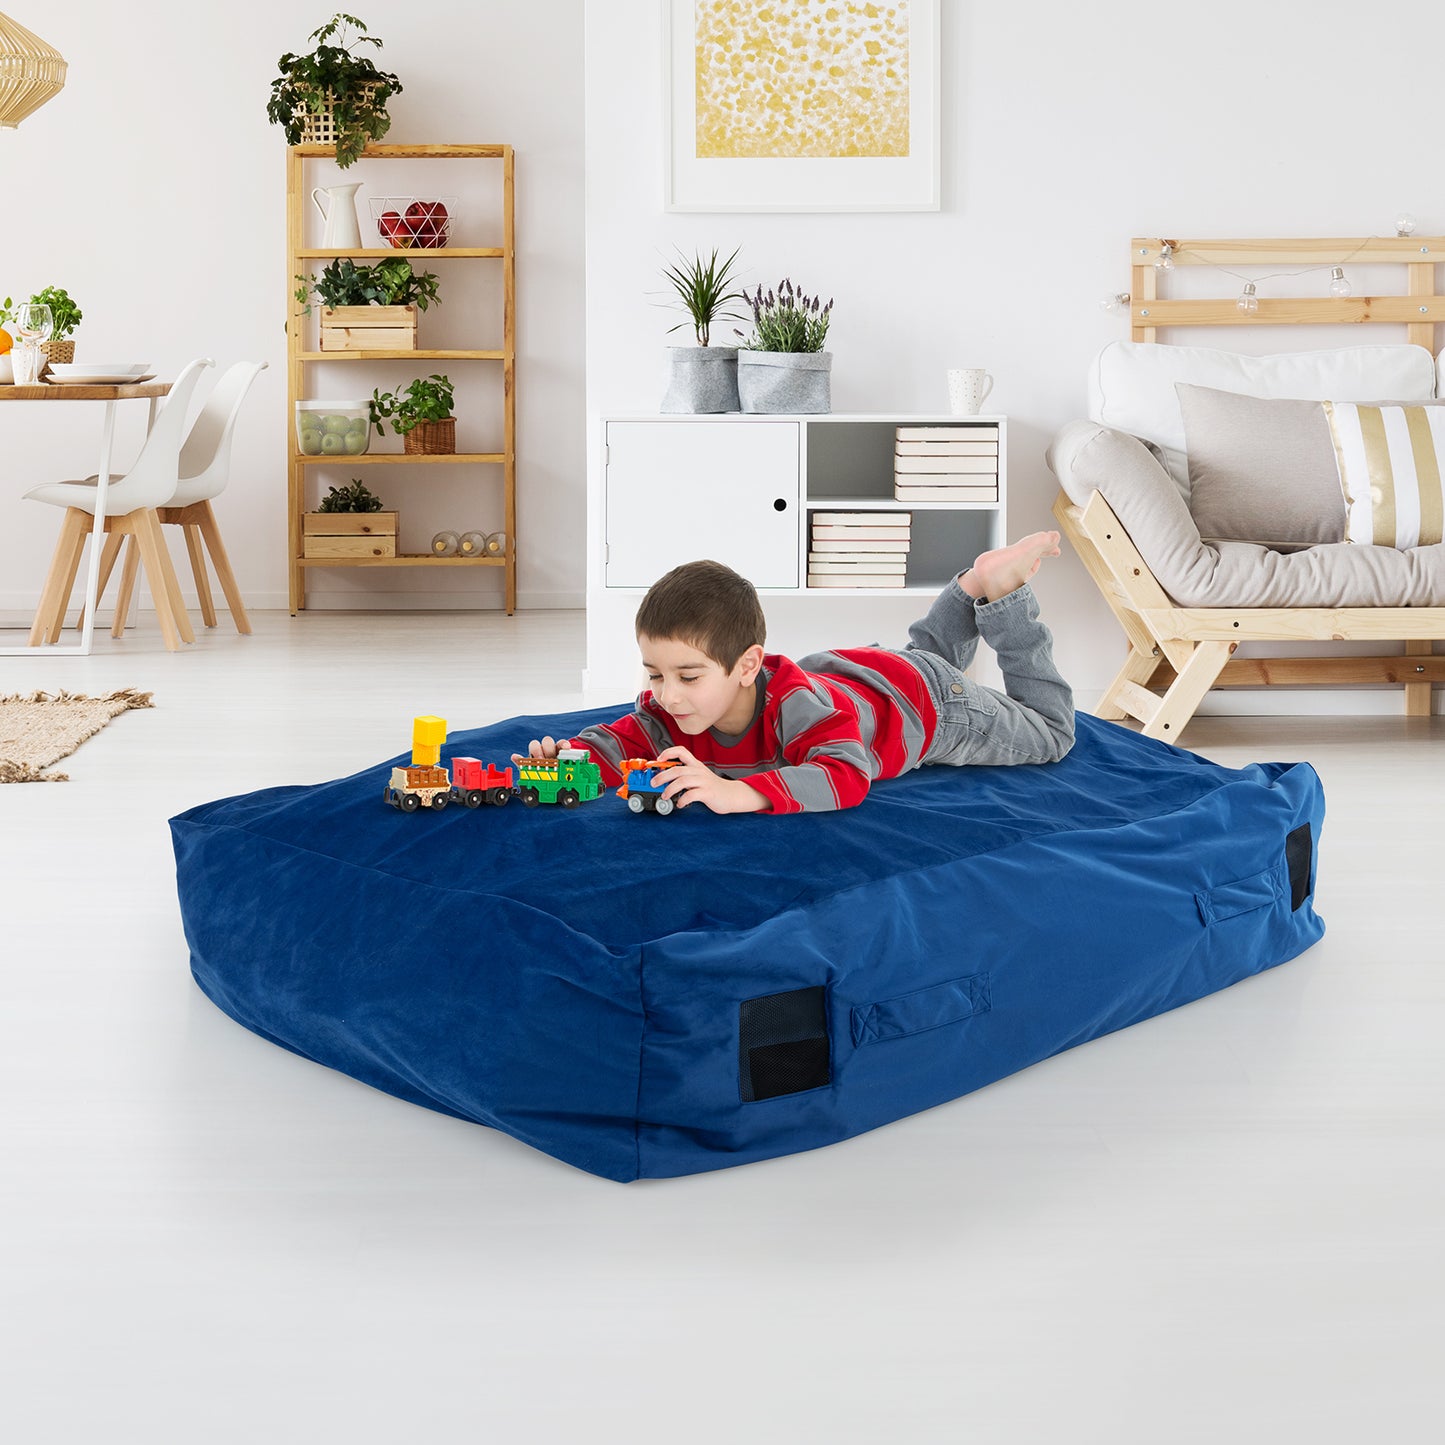 47 x 35.5 Inch Crash Pad Sensory Mat with Foam Blocks and Washable Cover-Blue